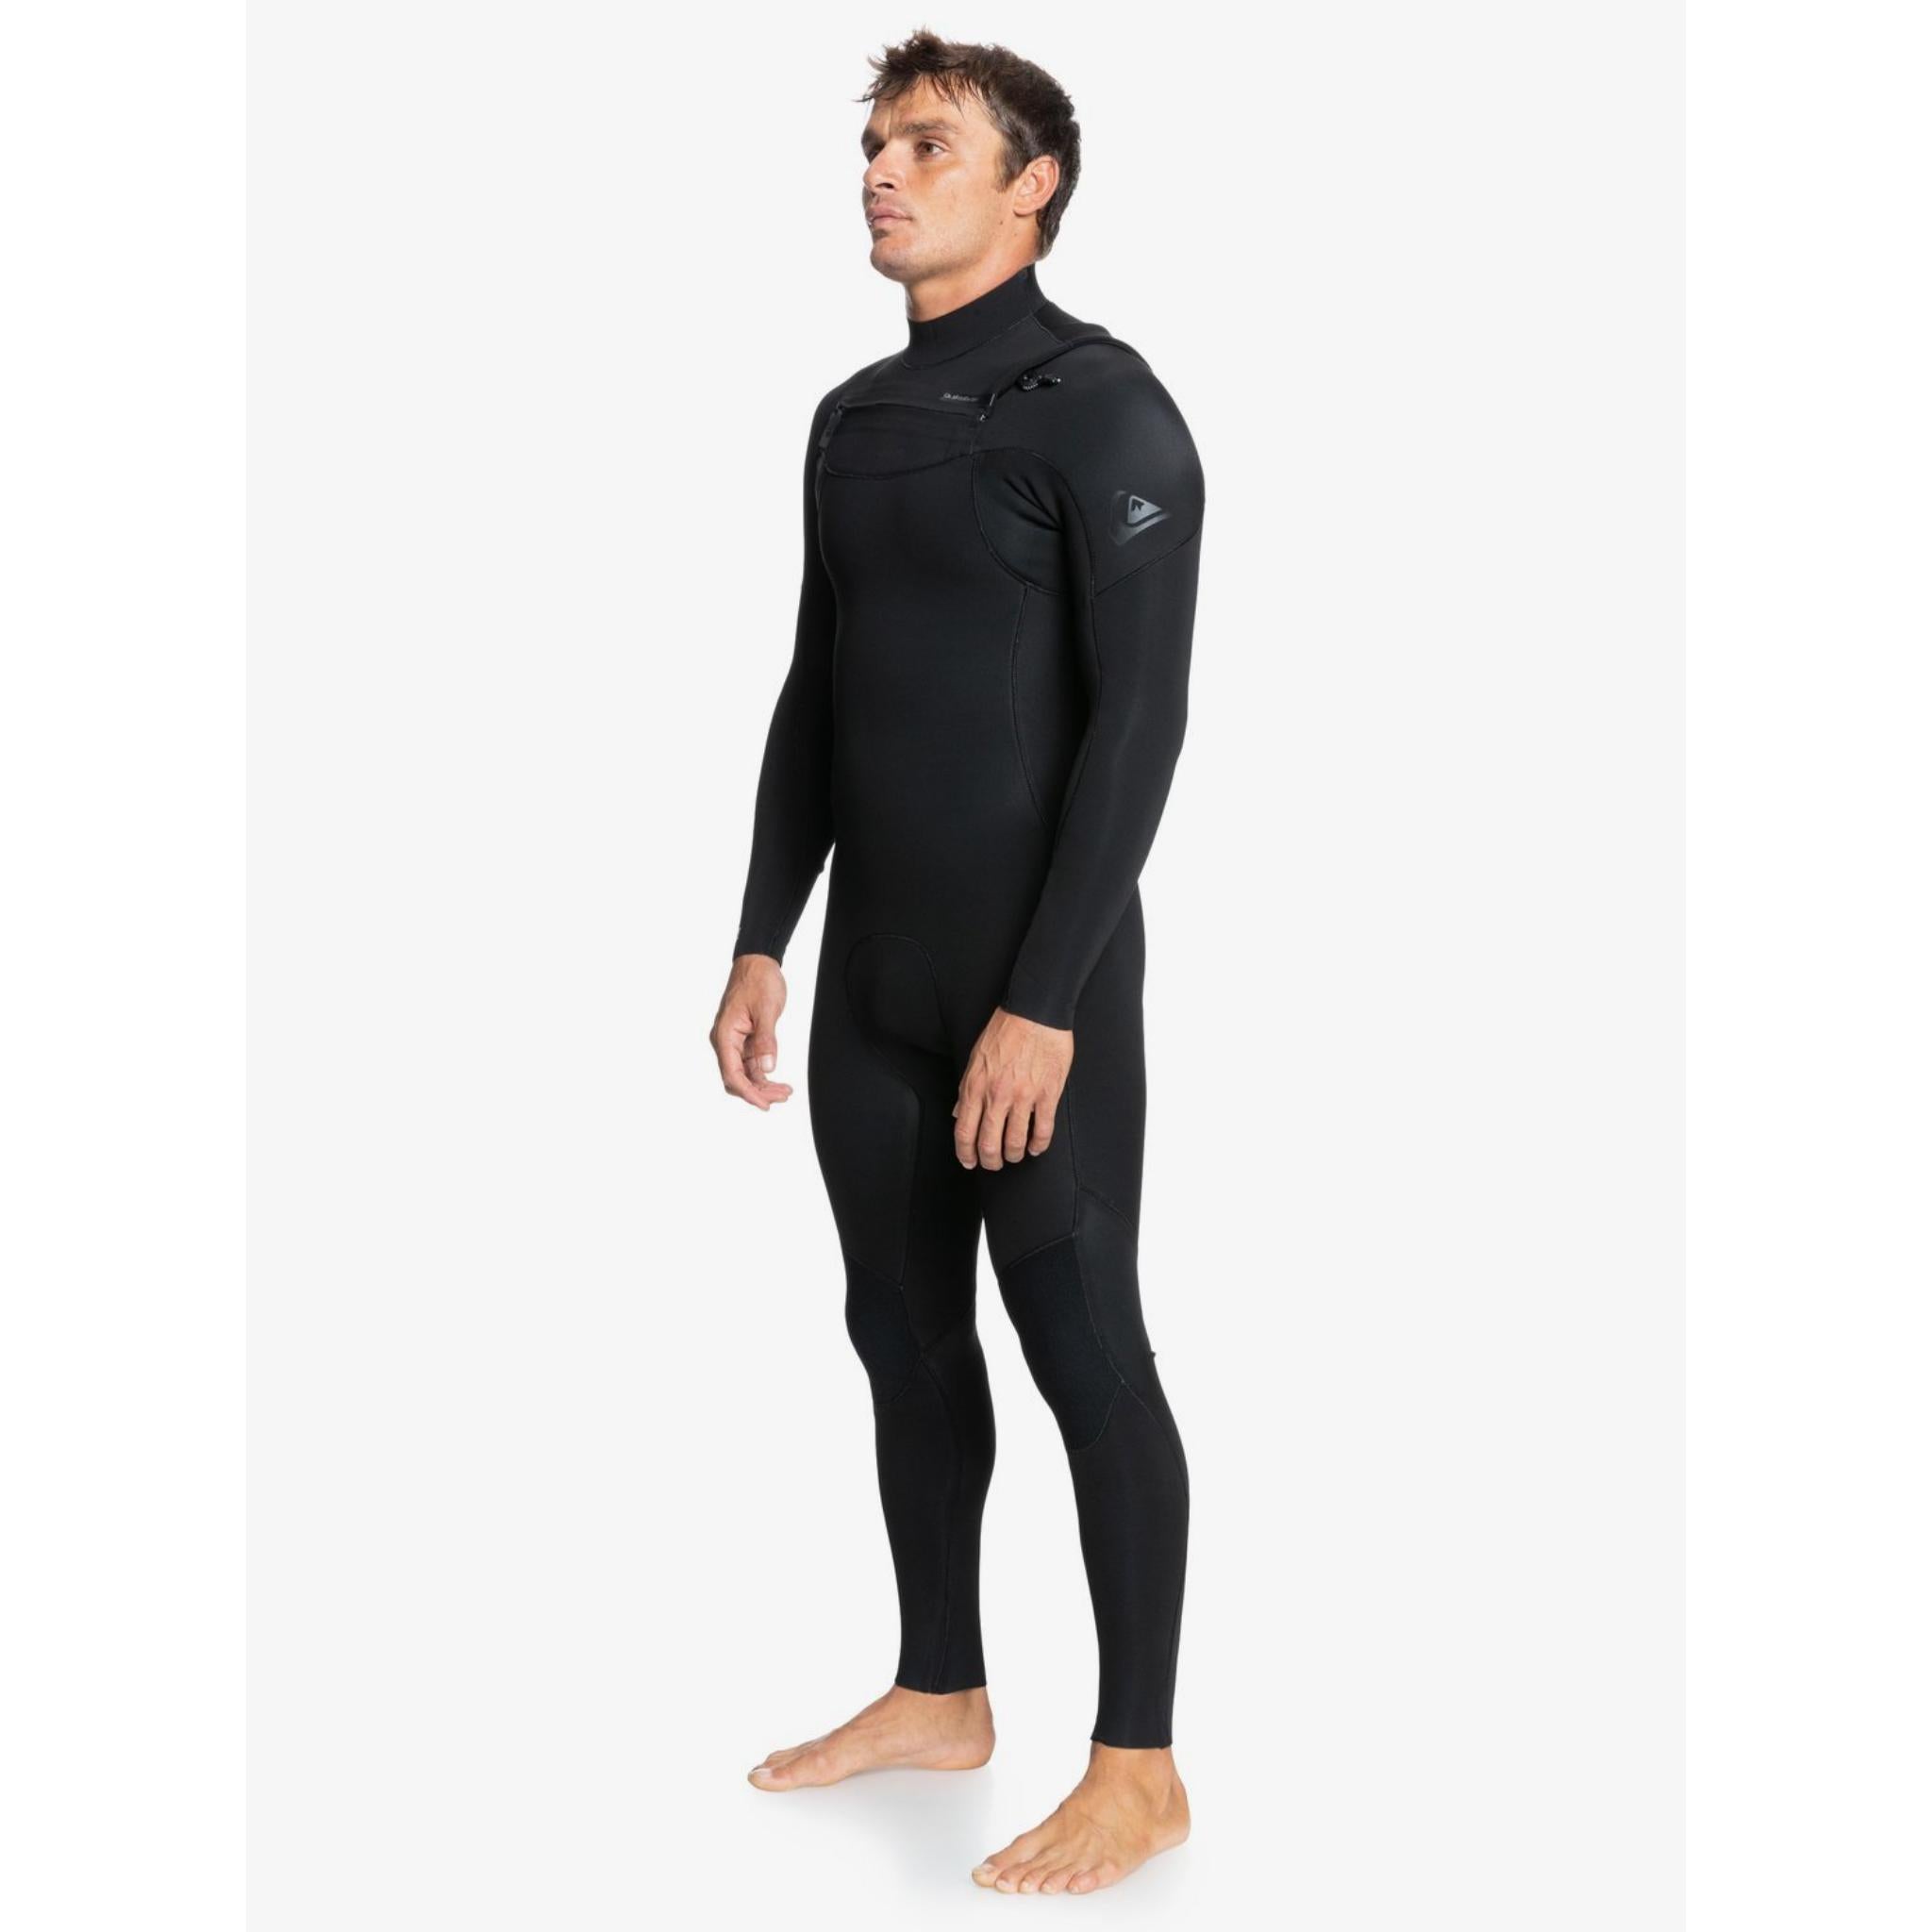 Quiksilver Everyday Sessions 3/2mm Wetsuit 